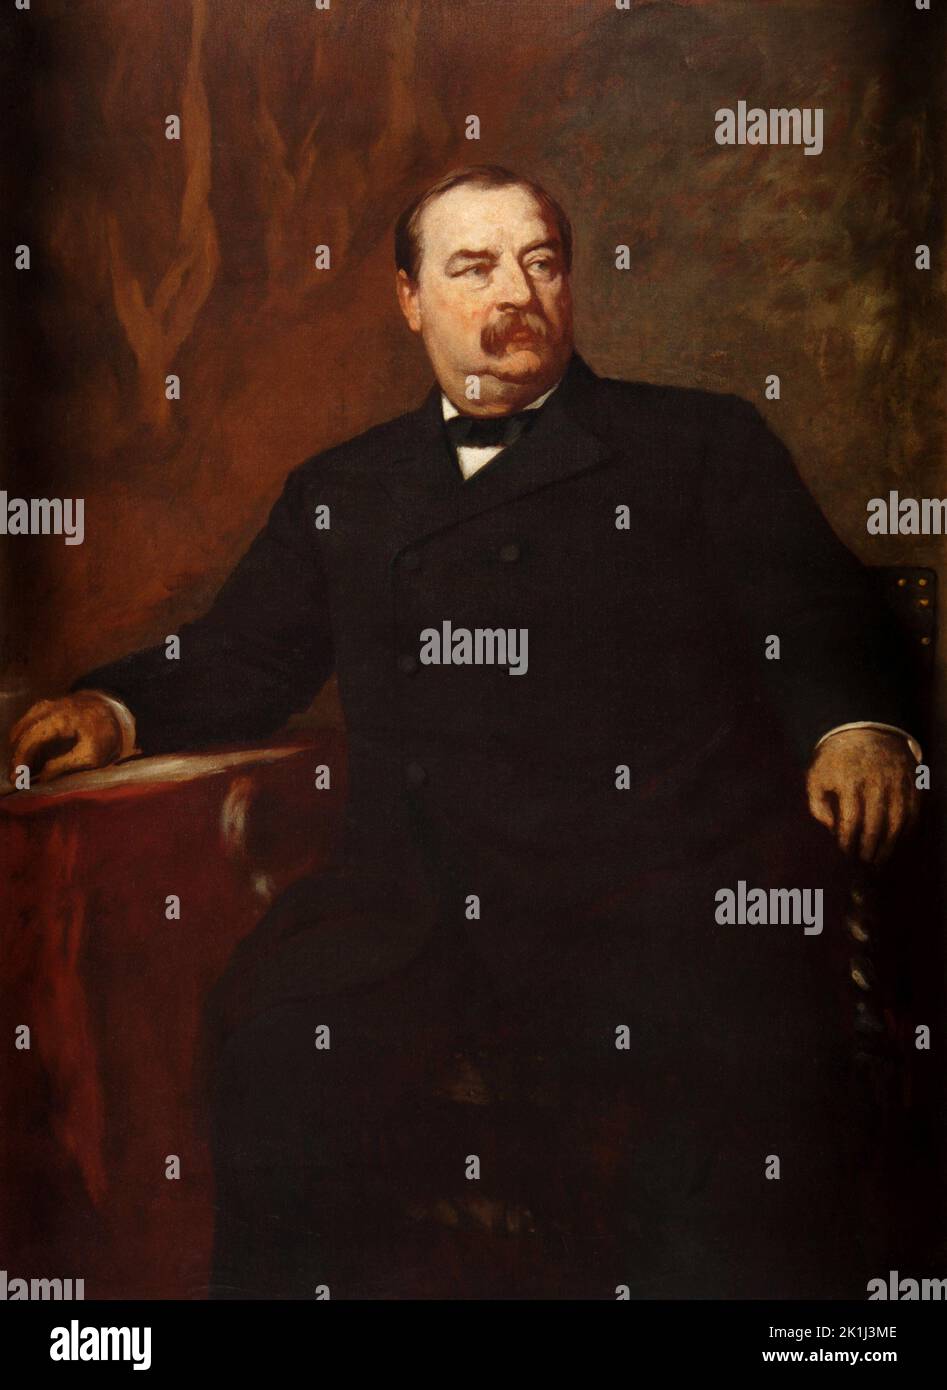 A portrait of US president Grover Cleveland, who was the 22nd and 24th president (and he is the only one to have won two non-consecutive mandate)Gubernatorial portrait of Grover Cleveland Stock Photo